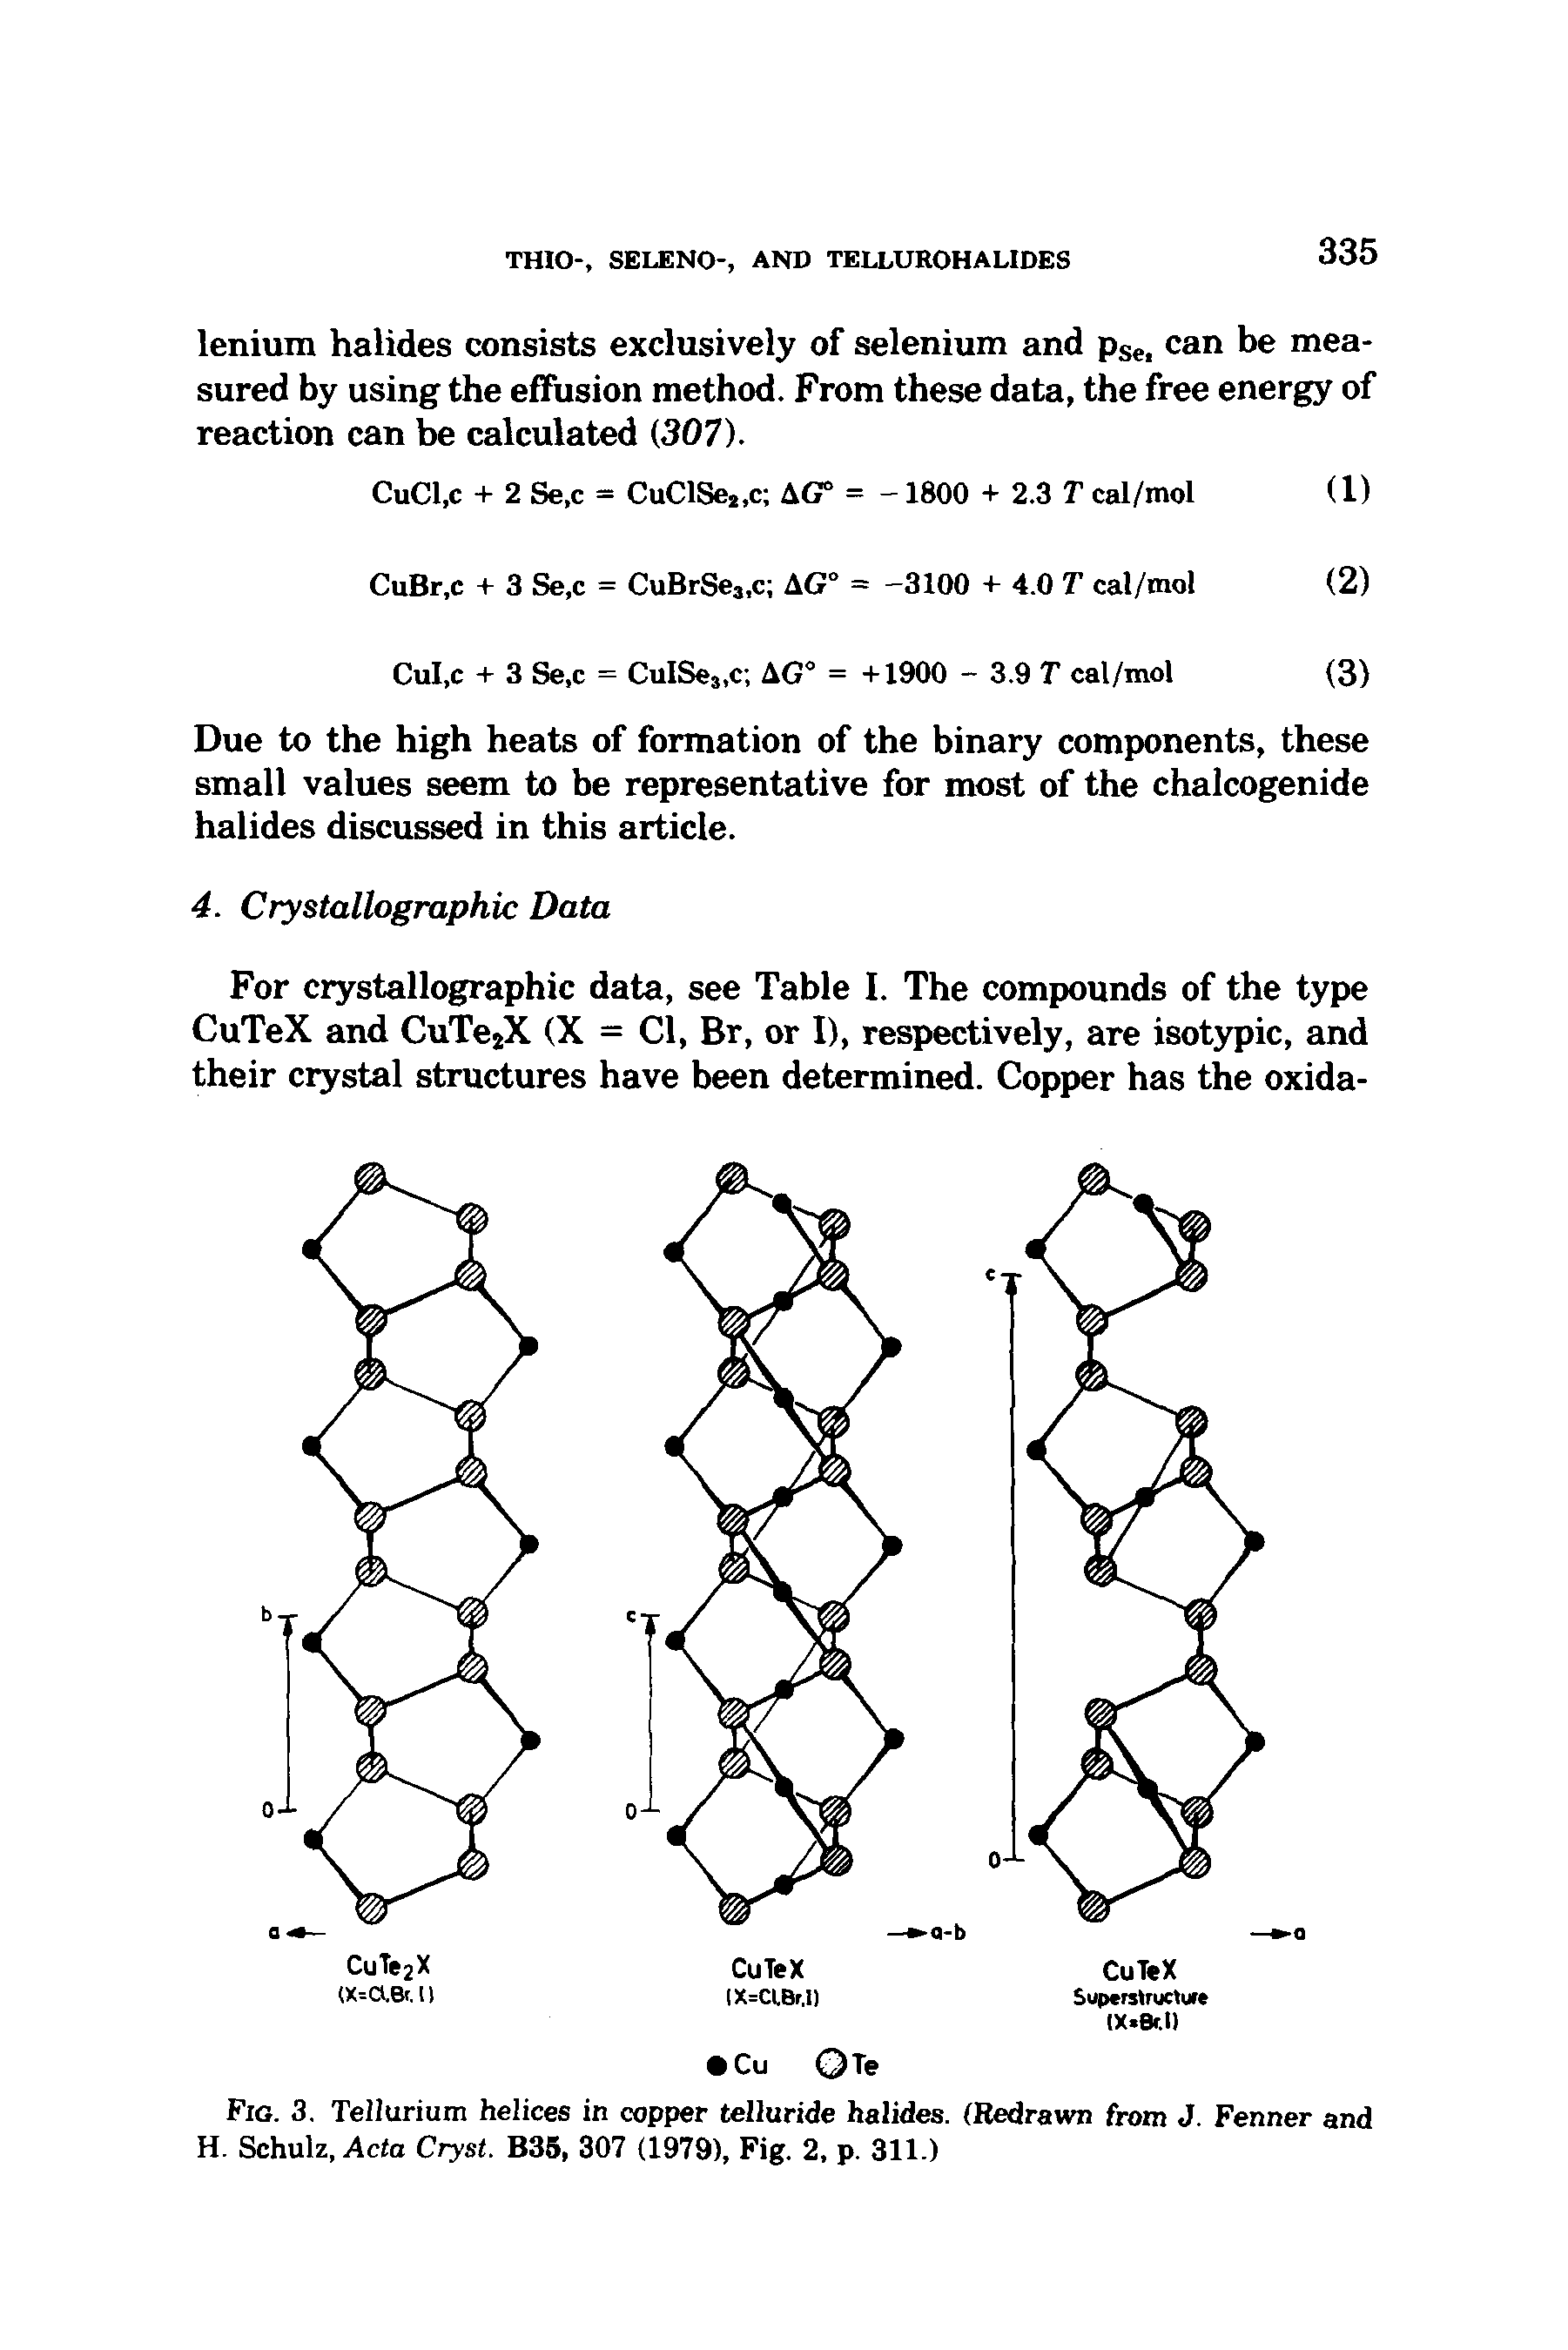 Fig. 3. Tellurium helices in copper telluride halides. (Redrawn from J. Fenner and H. Schulz, Acta Cryst. B35, 307 (1979), Fig. 2, p. 311.)...